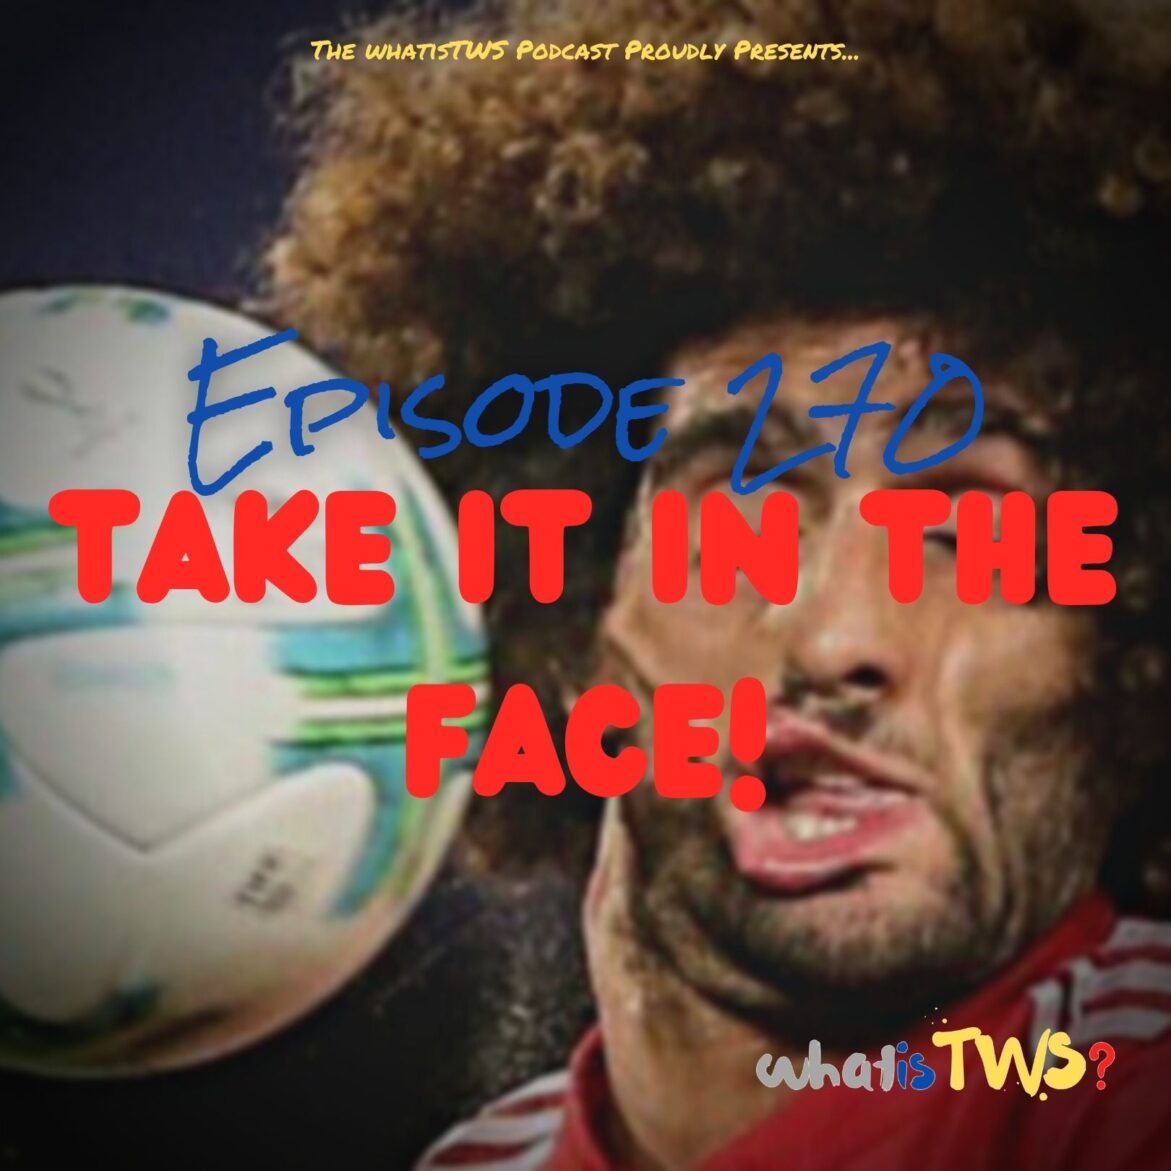 Black Podcasting - Episode 270 - Take it in the Face!